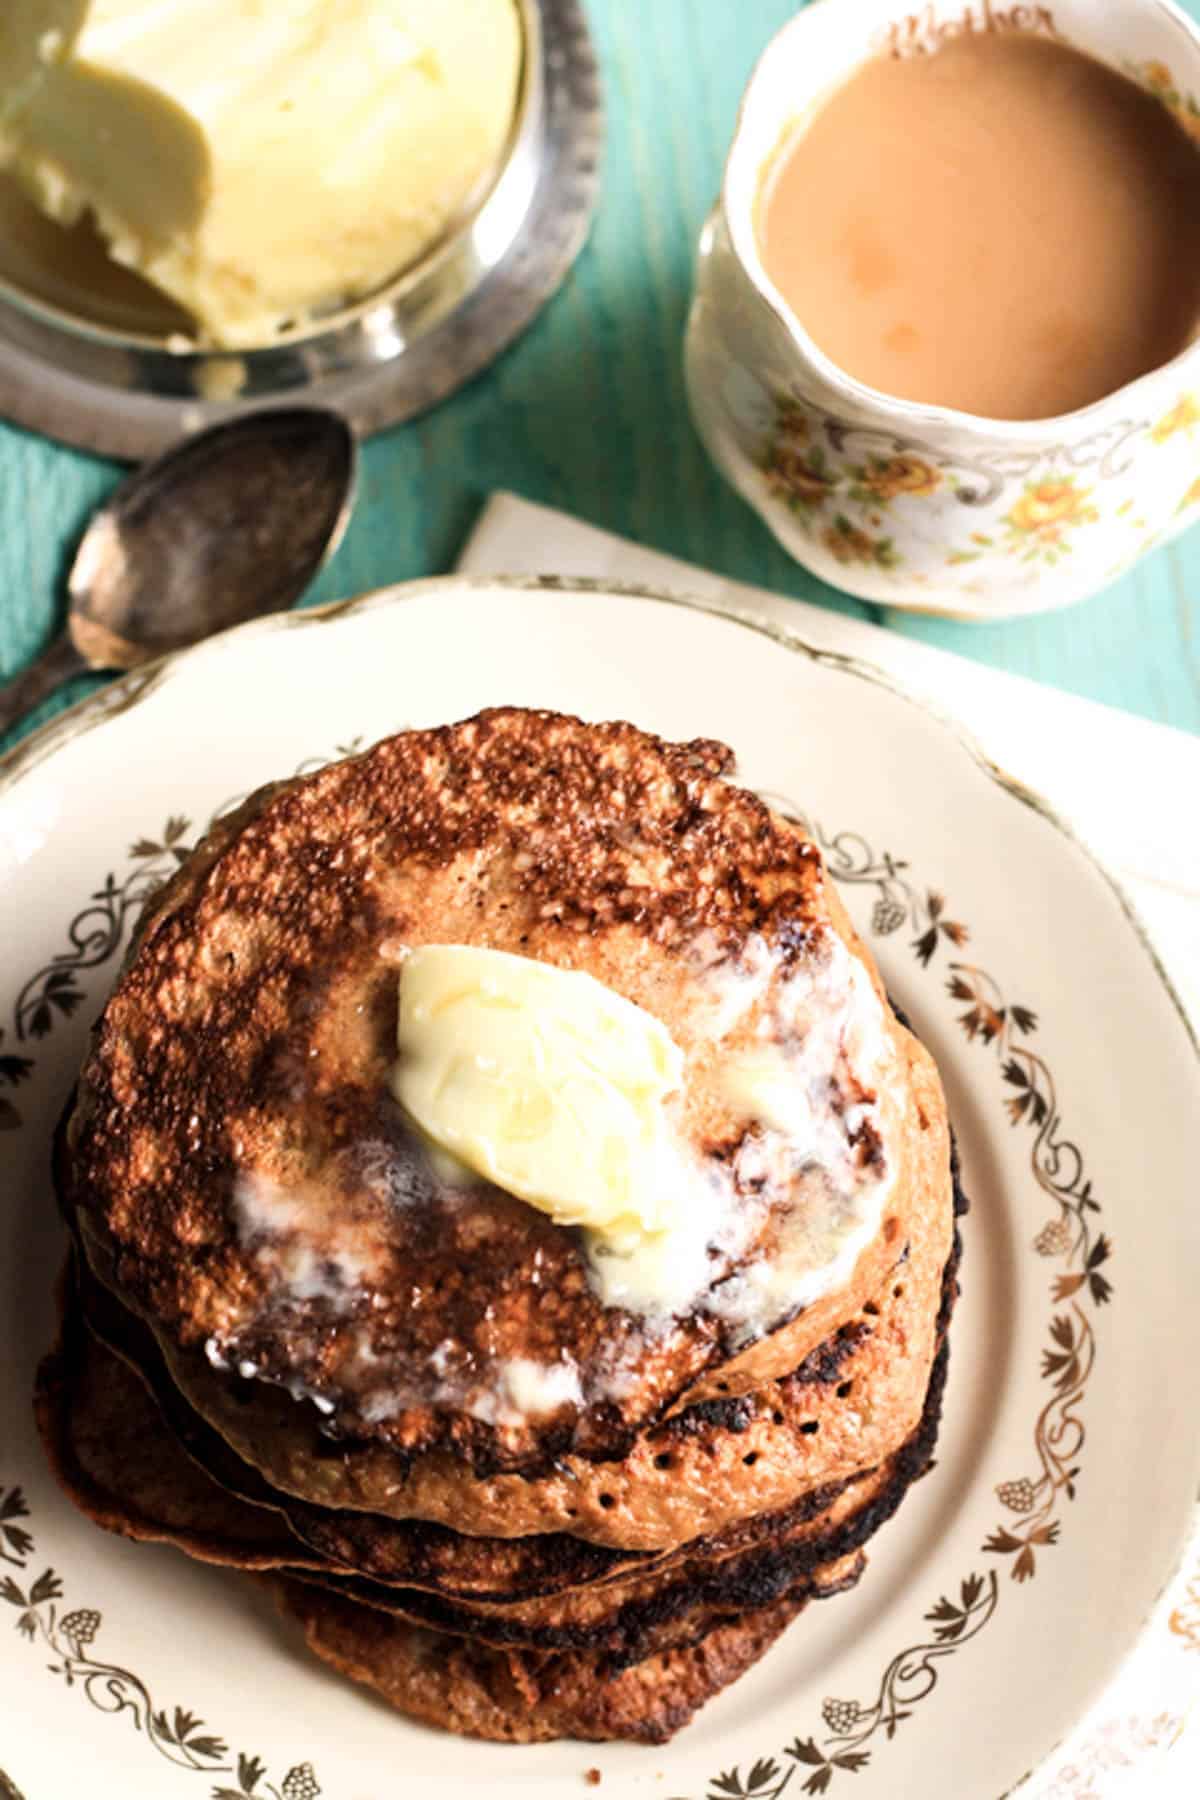 A stack of Banana and Walnut Pancakes on a plate with melted butter